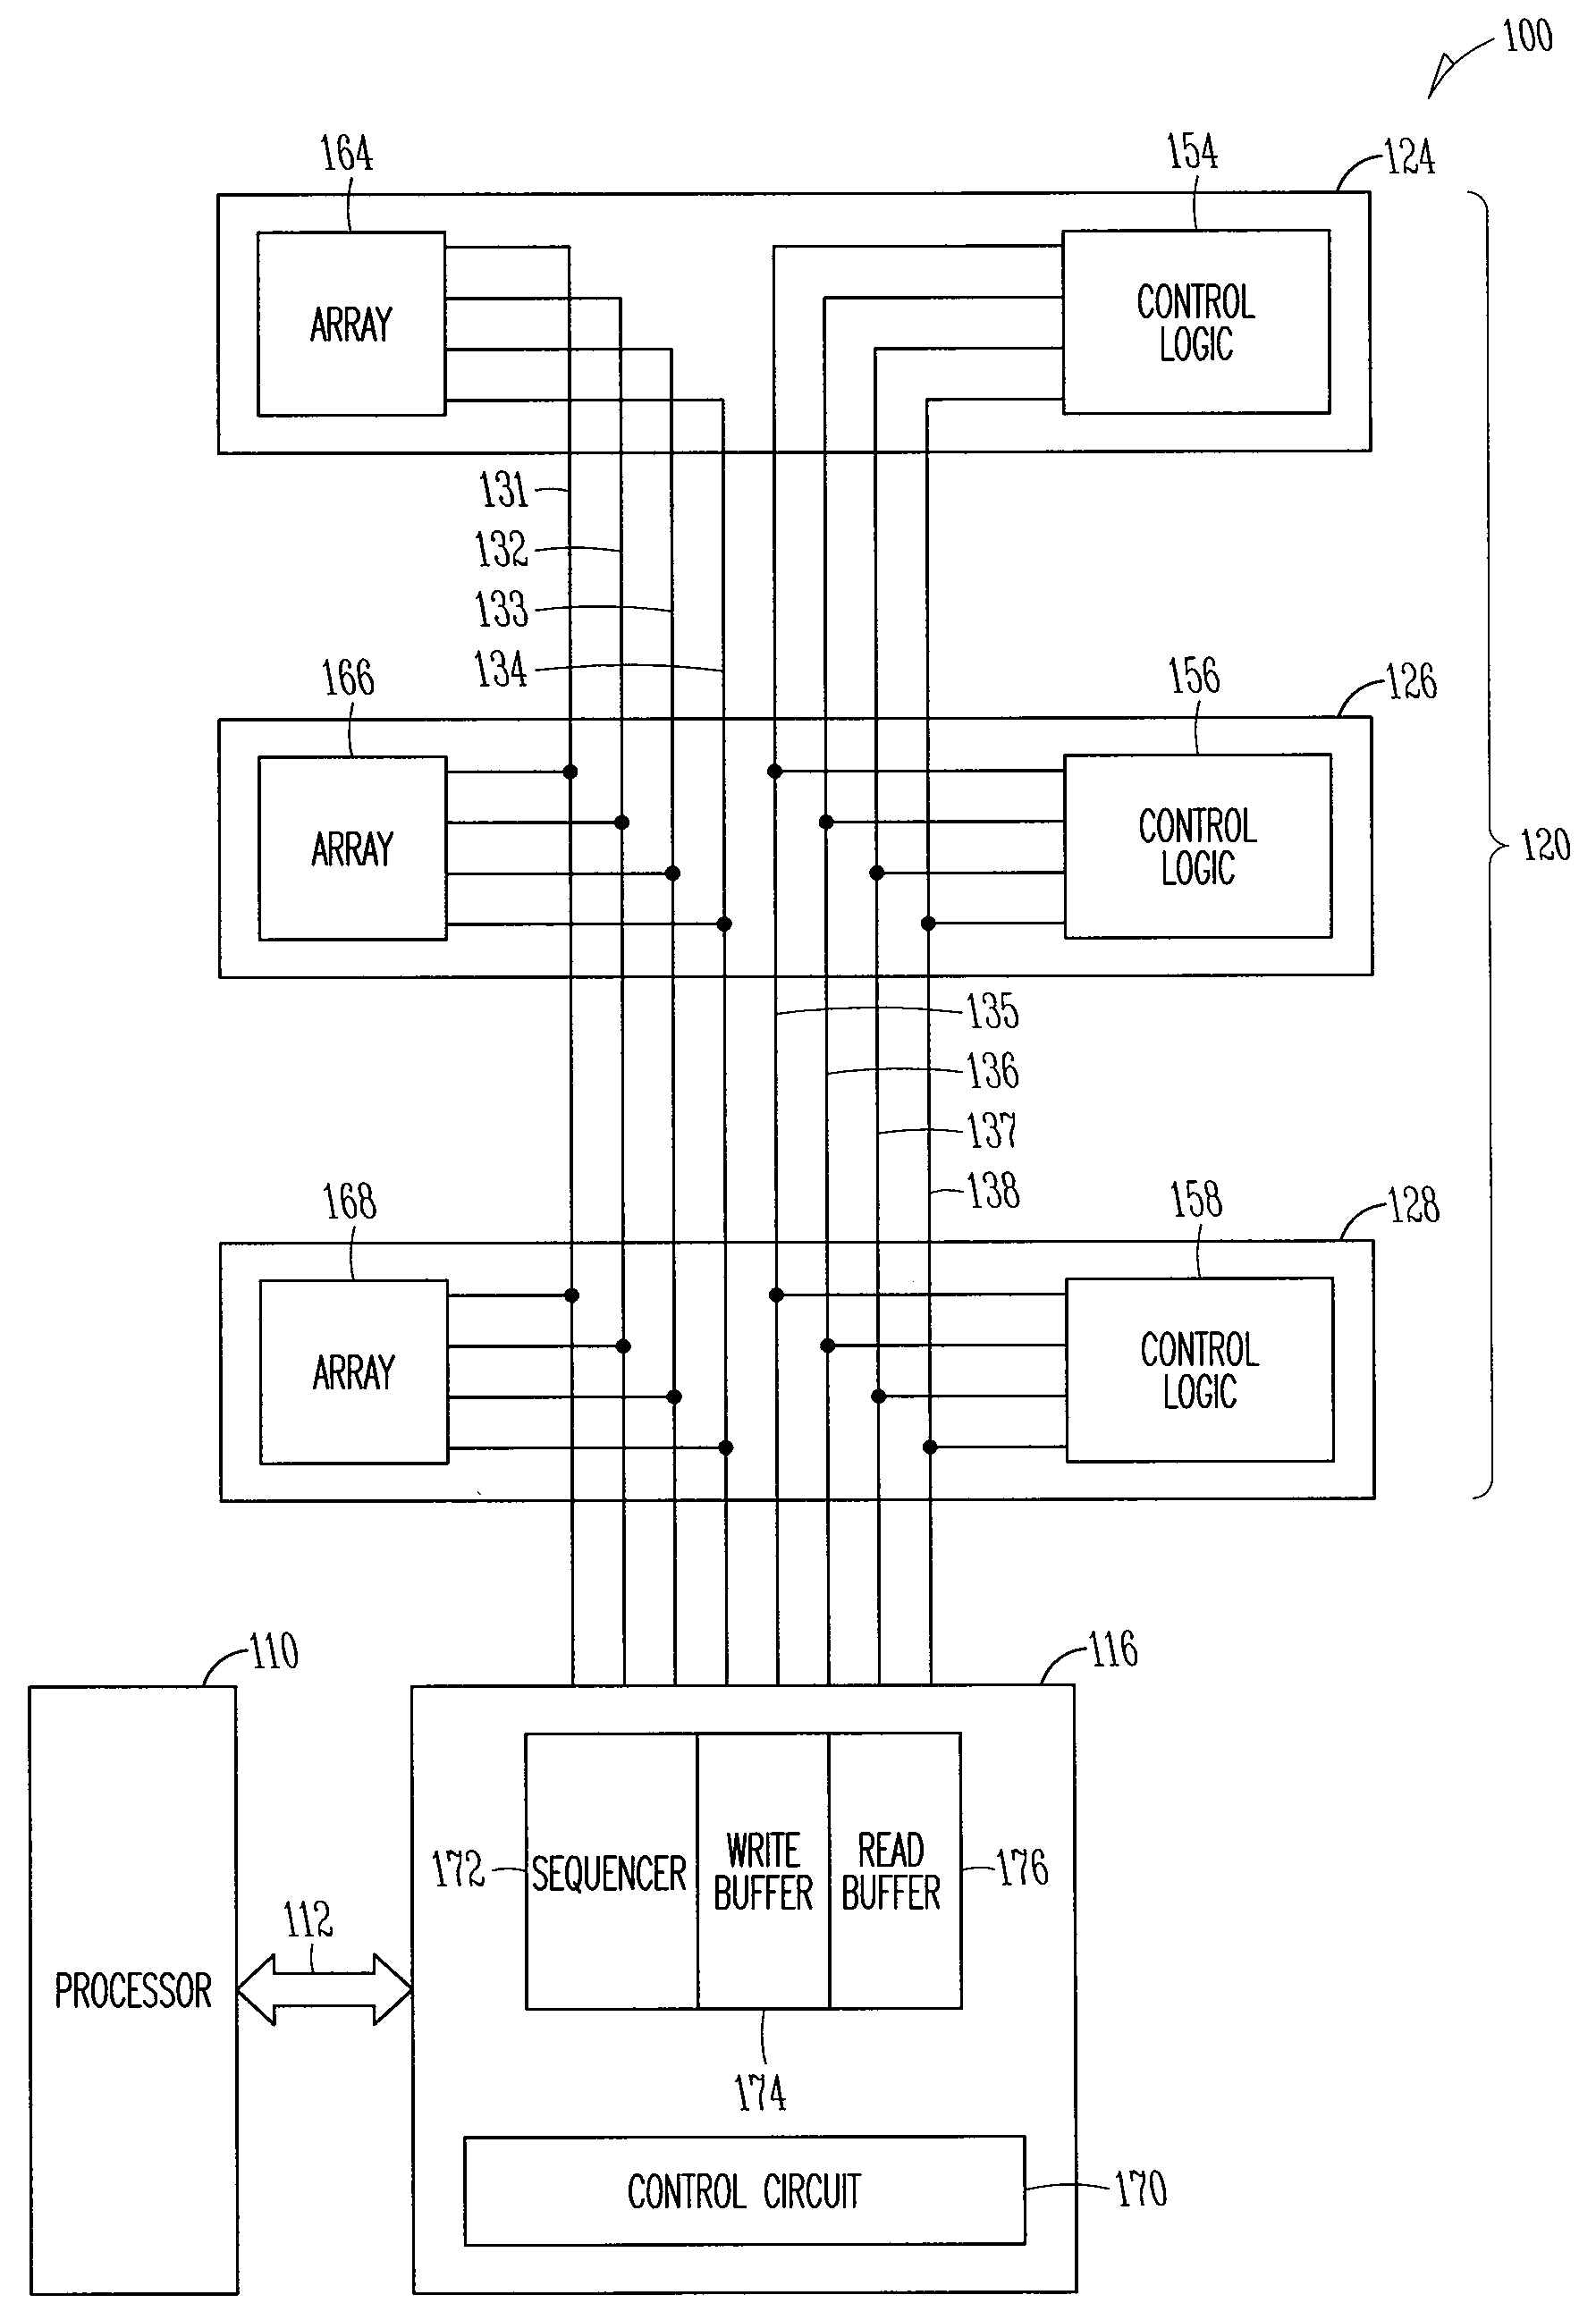 Multiple device apparatus, systems, and methods